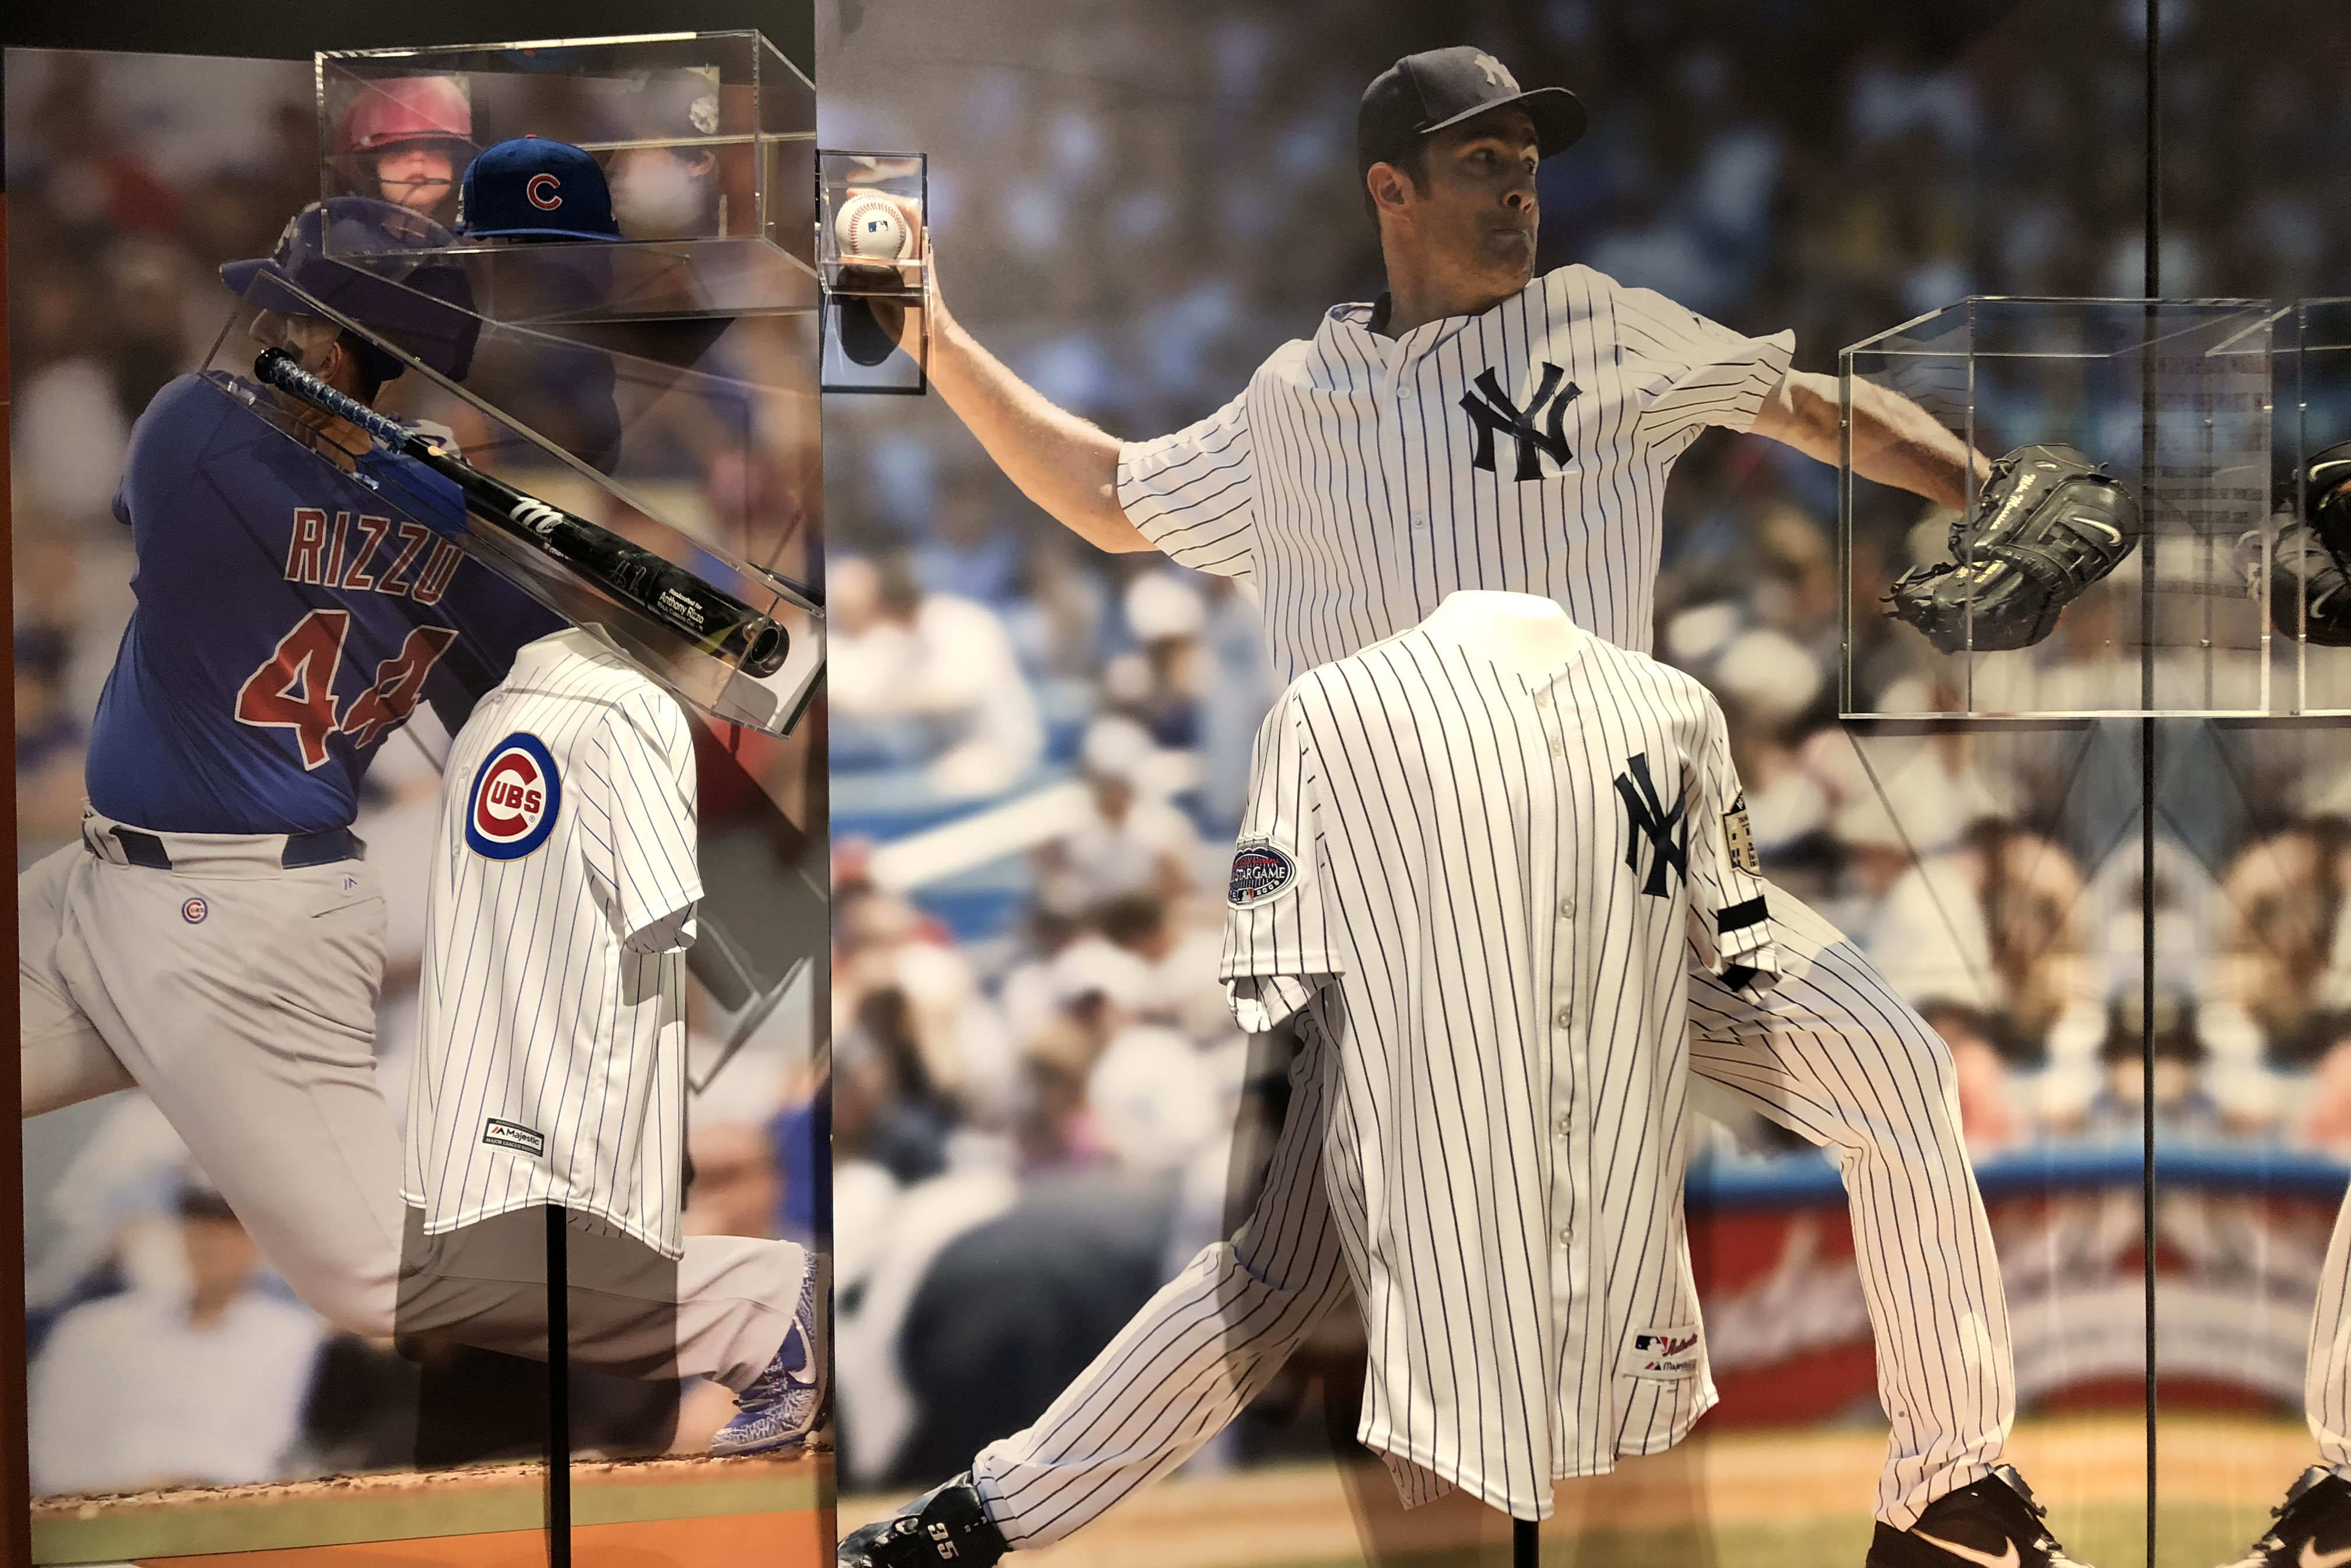 MLB Exhibit features artifacts from Mike Mussina and Anthony Rizzo